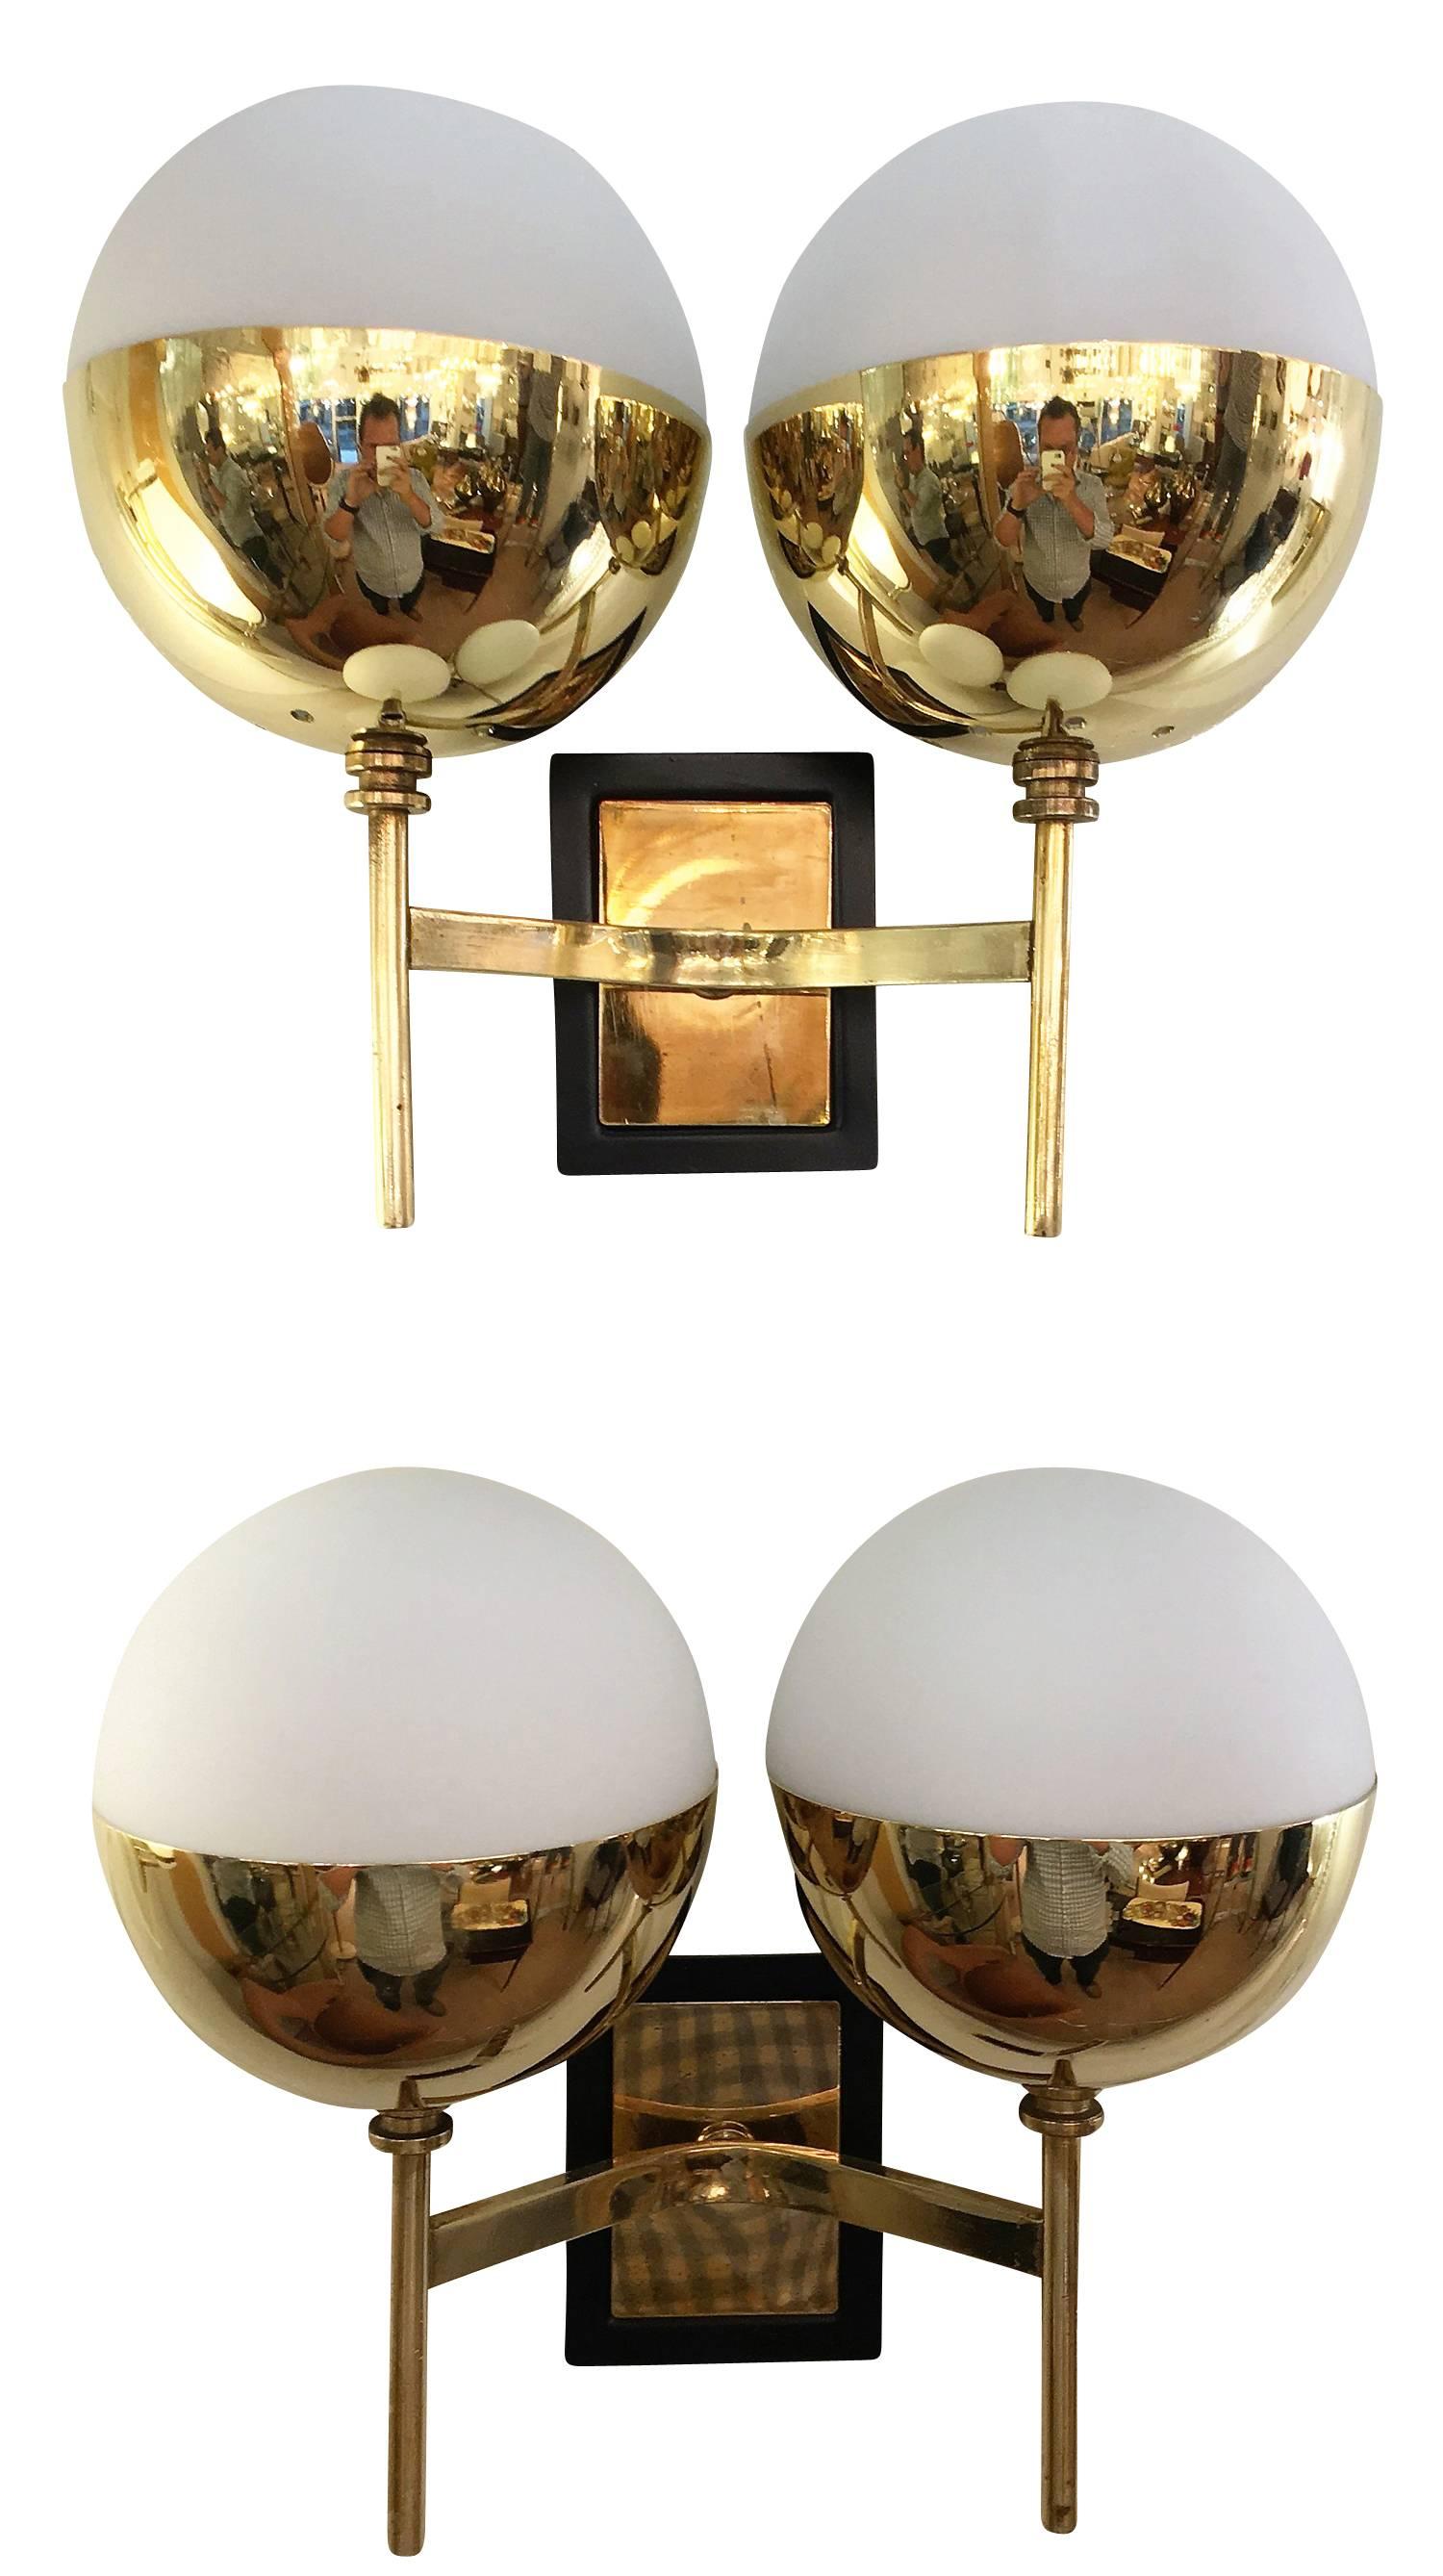 Set of four diminutive wall lights in the manner of Stilnovo each featuring two frosted glass shades on a brass frame. The backplates have a black lacquered edge. Price is per pair.

Available for viewing at Gaspare Asaro-Italian Modern in NYC